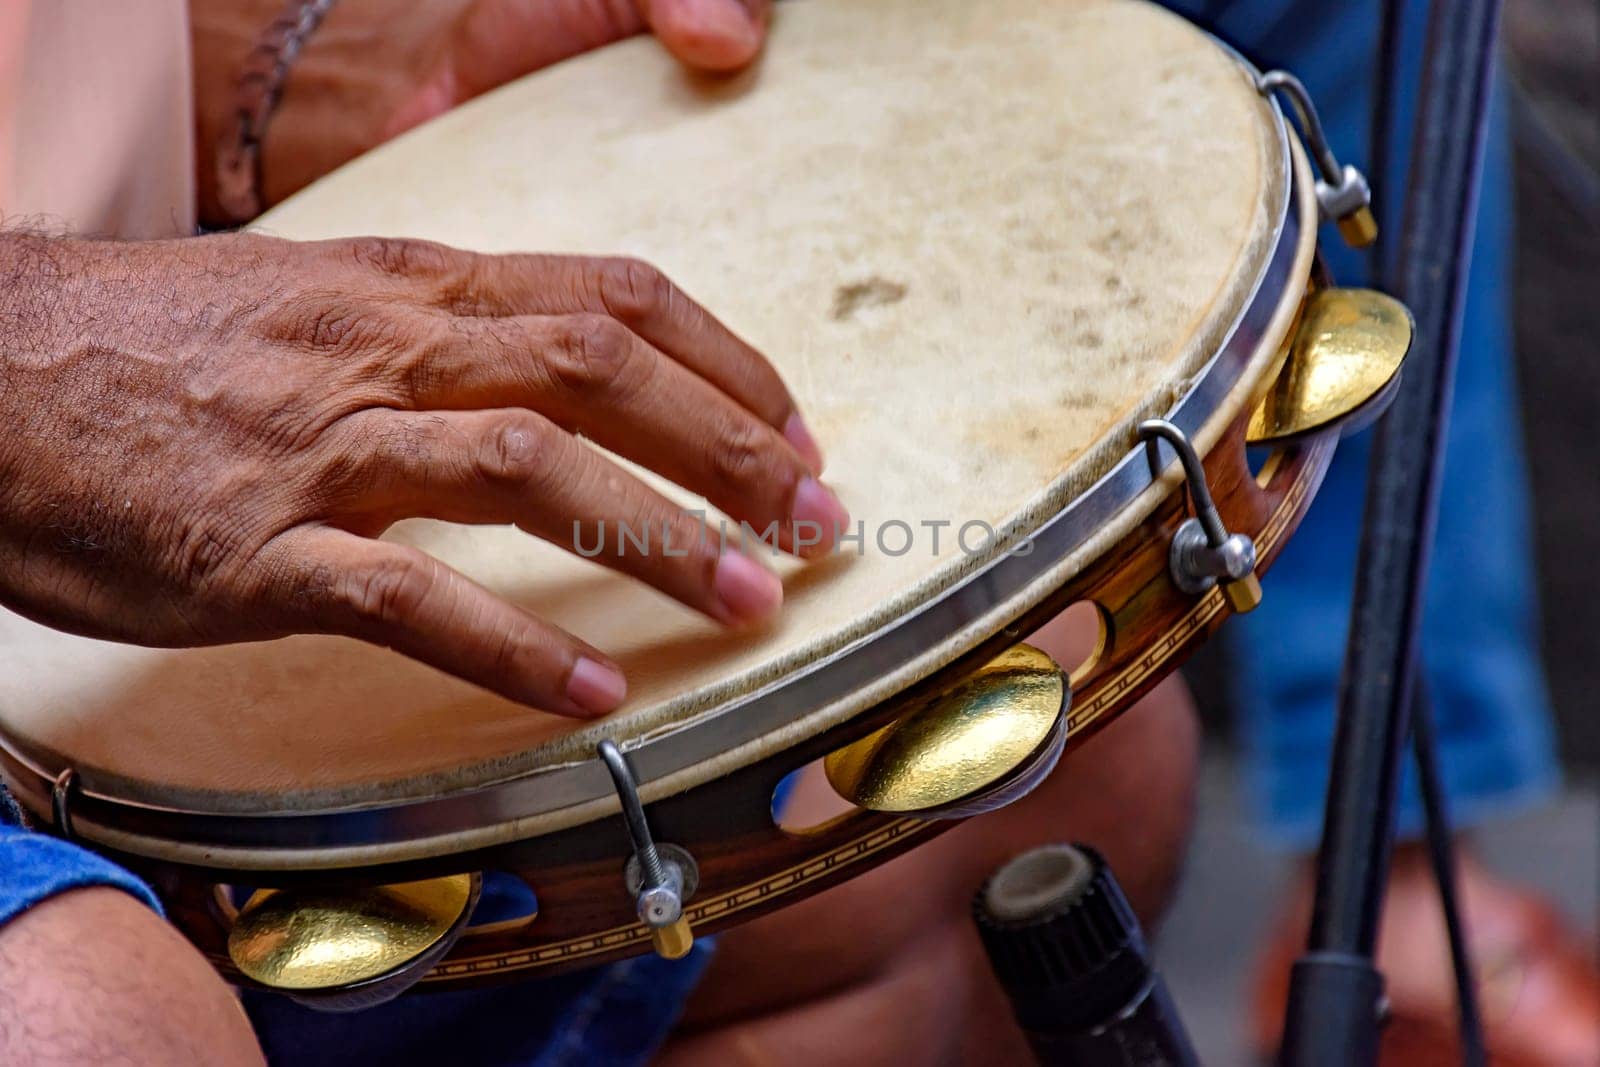 Tambourine being played by a ritimist during a samba performance in Rio de Janeiro, Brazil